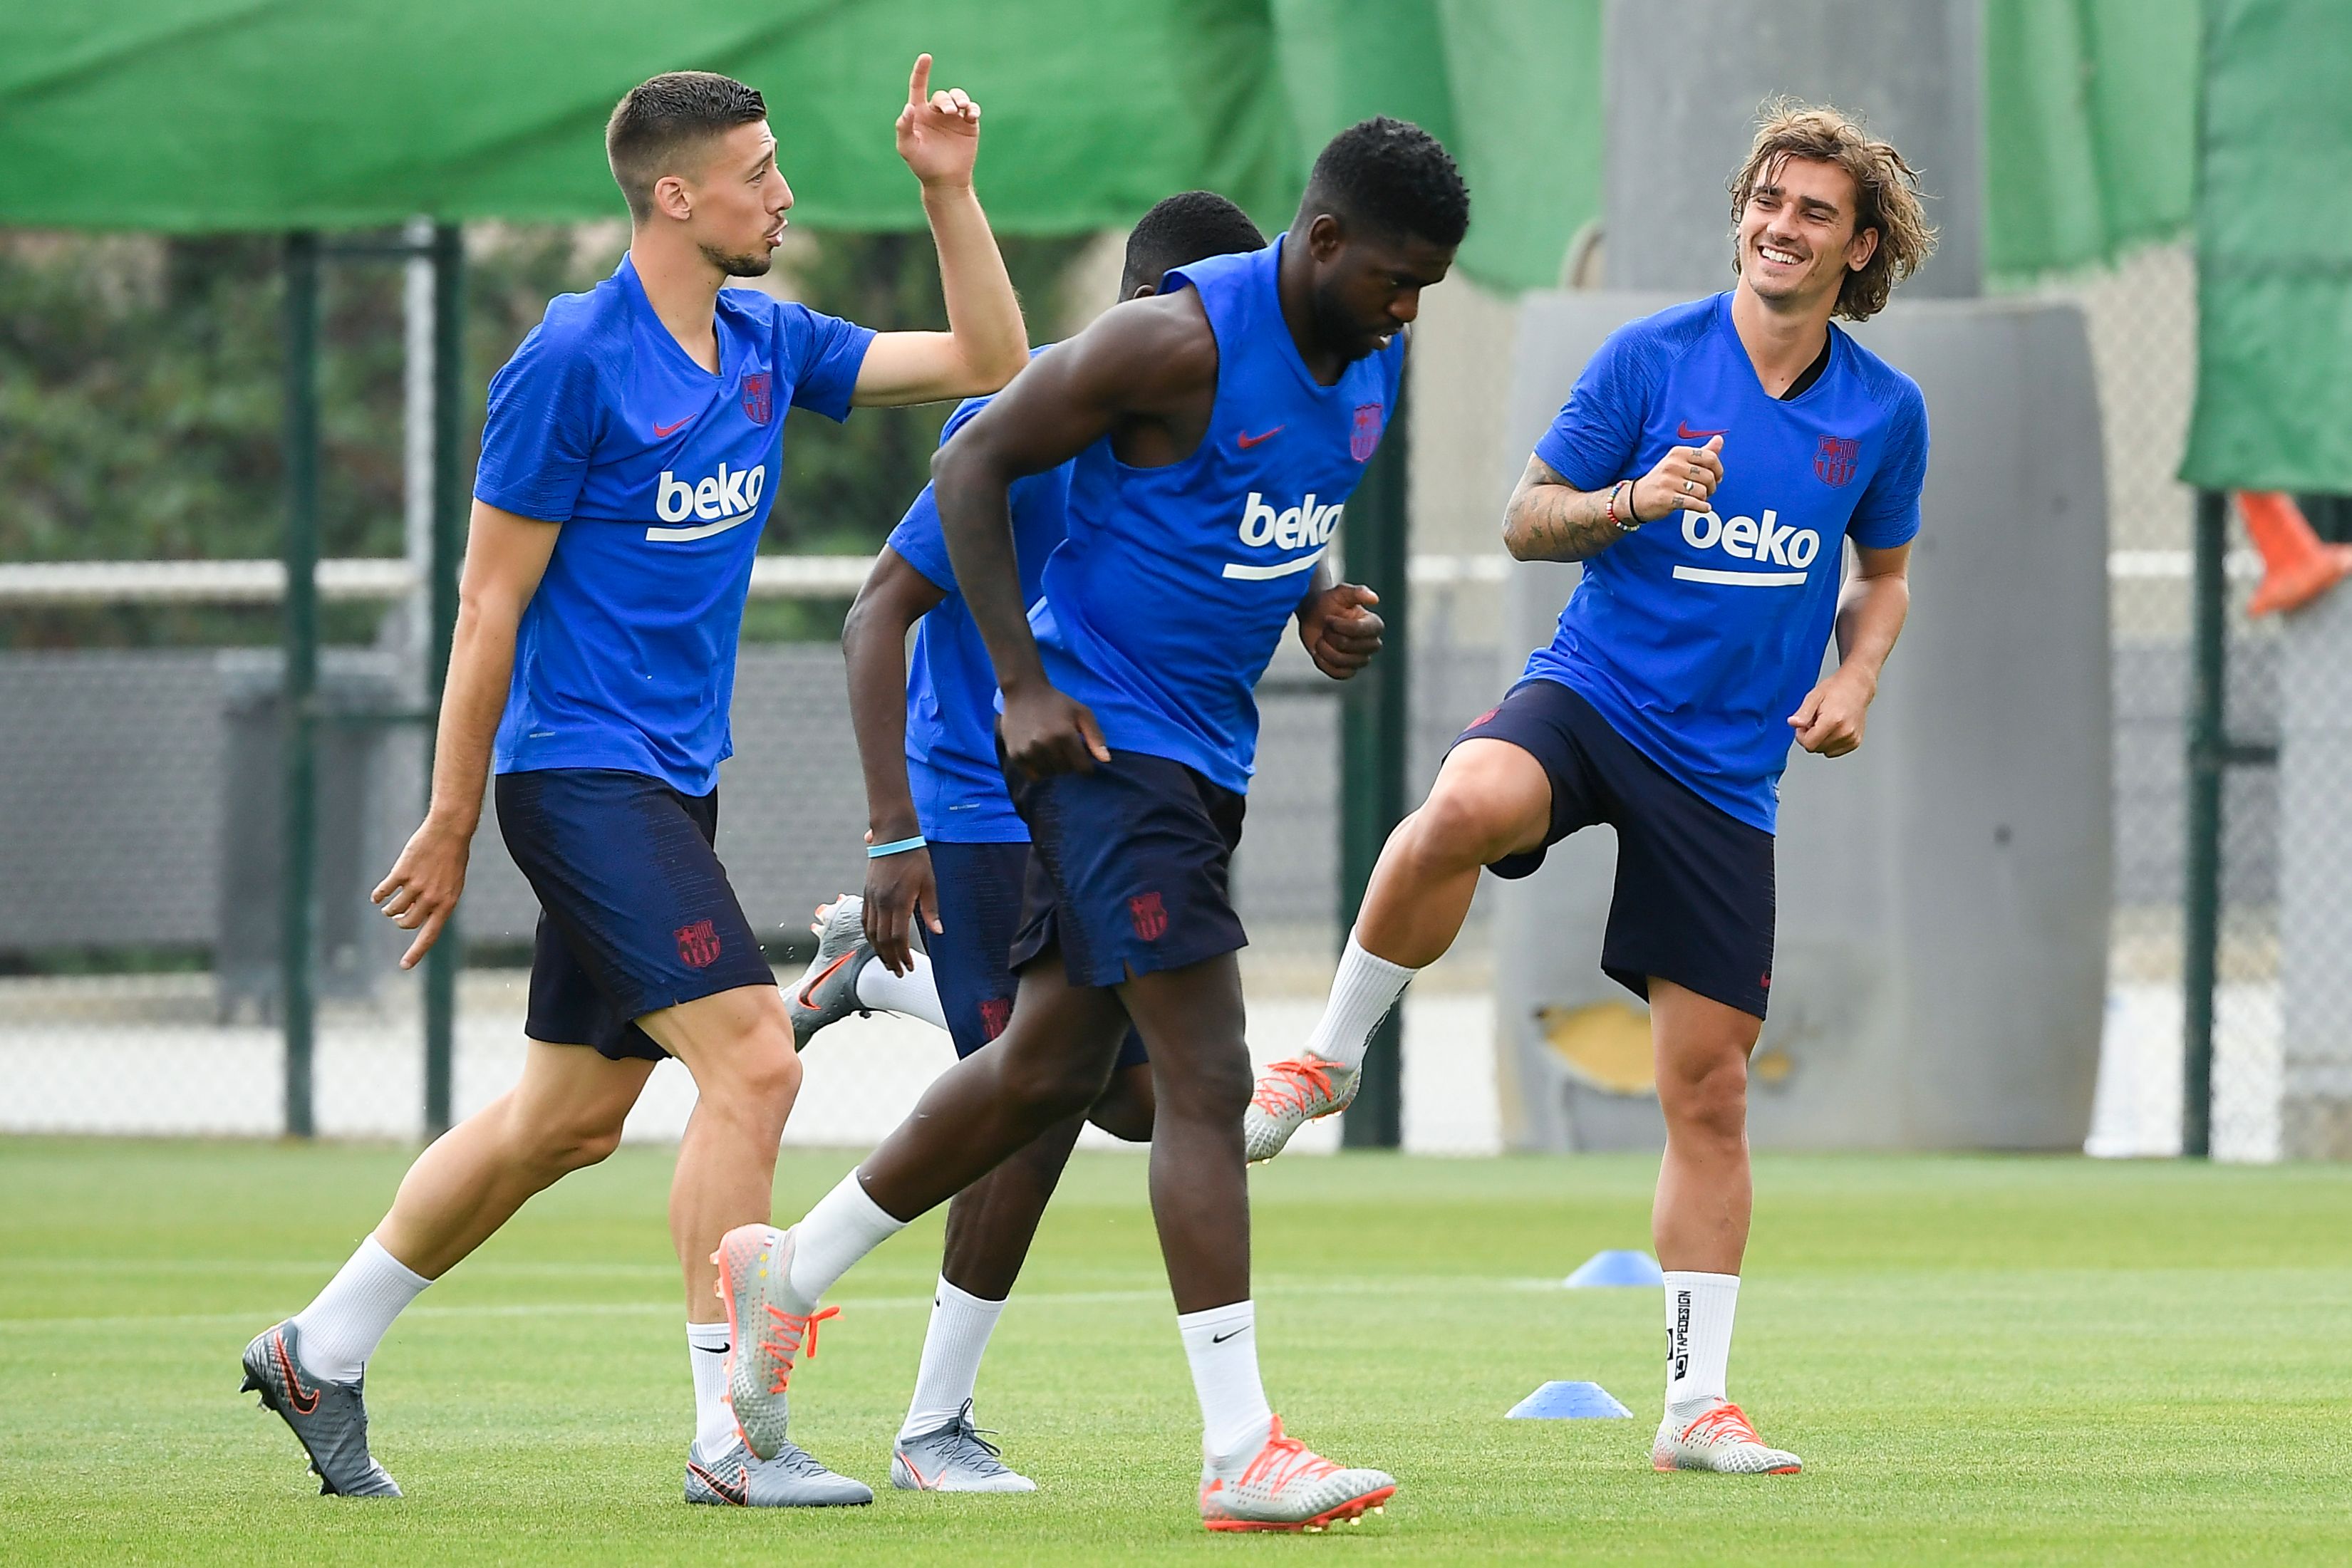 (L-R) Barcelona's French defender Clement Lenglet, Barcelona's French defender Samuel Umtiti and Barcelona's French forward Antoine Griezmann take part in a pre-season training session at the Joan Gamper training ground in Sant Joan Despi near Barcelona on July 17, 2019. (Photo by LLUIS GENE / AFP)        (Photo credit should read LLUIS GENE/AFP via Getty Images)